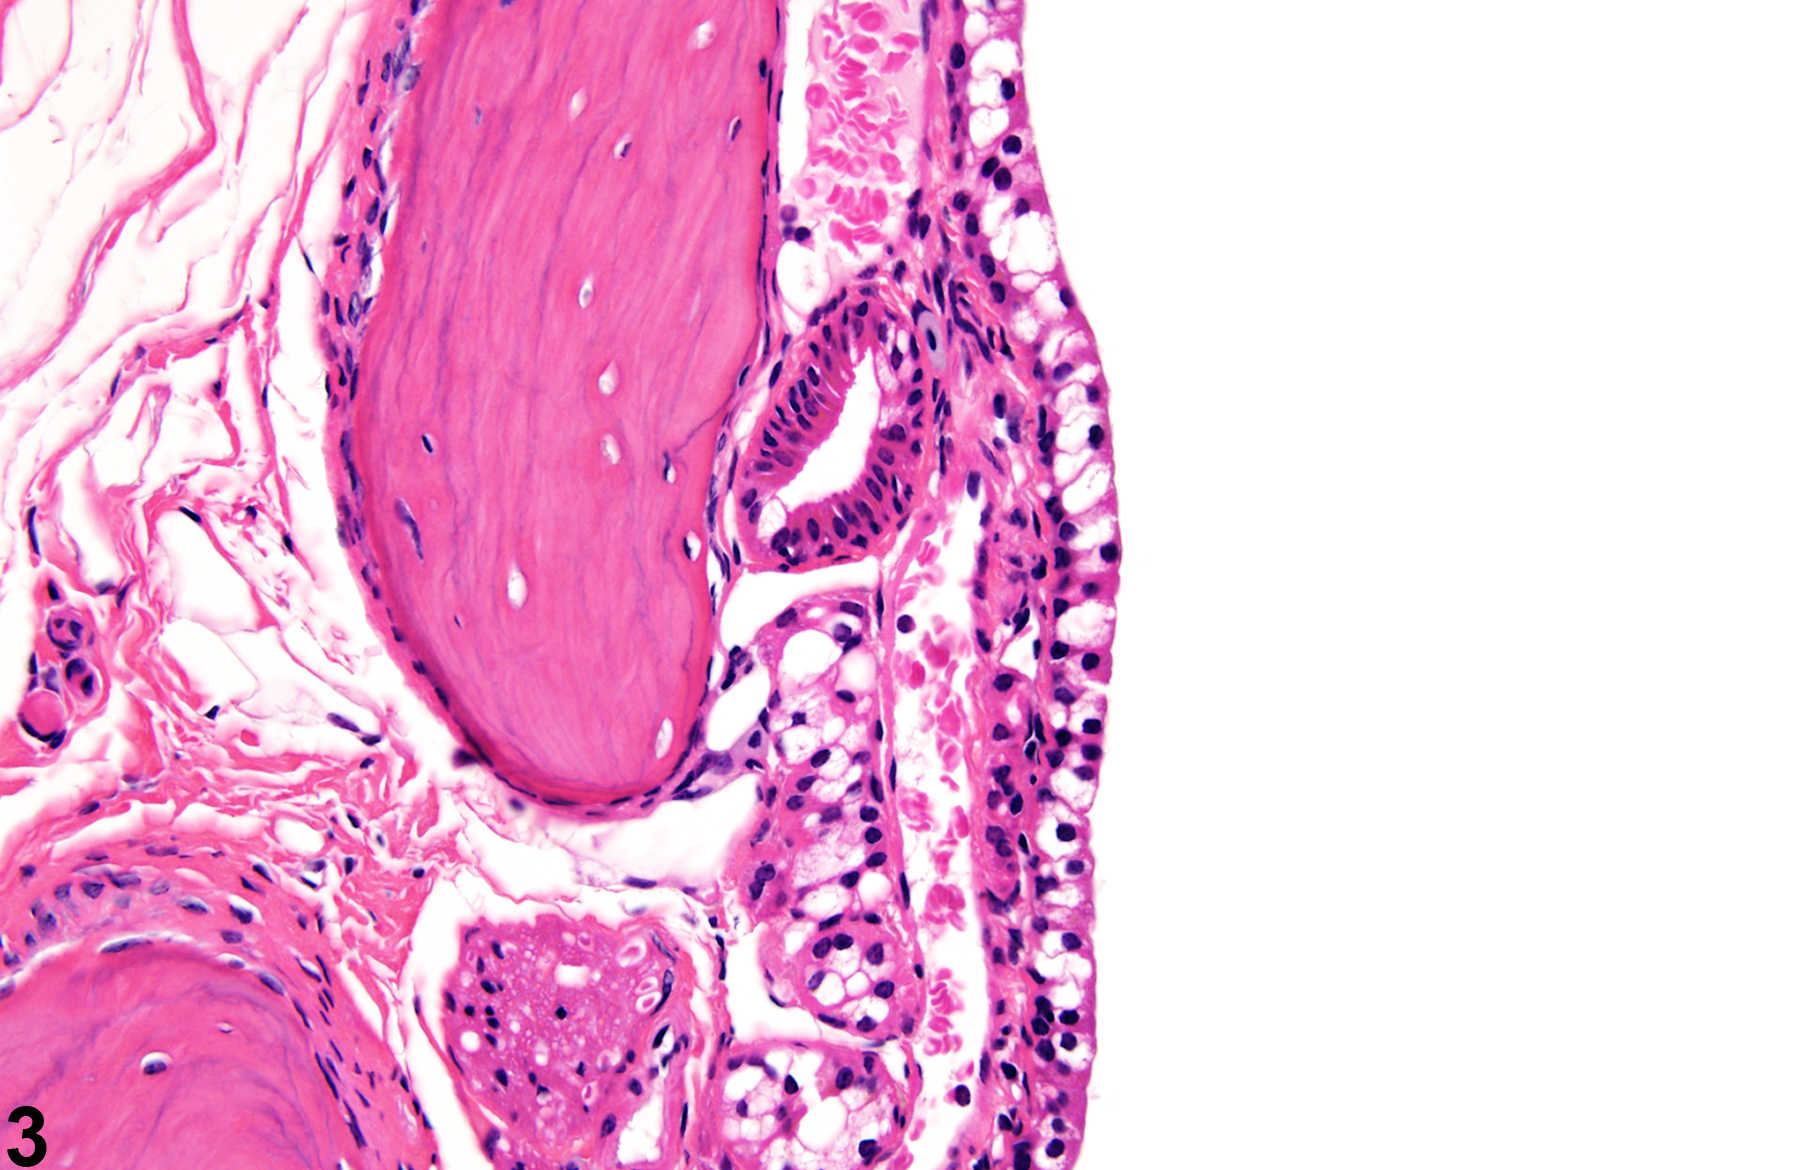 Image of degeneration in the nose, respiratory epithelium from a male B6C3F1/N mouse in a chronic study